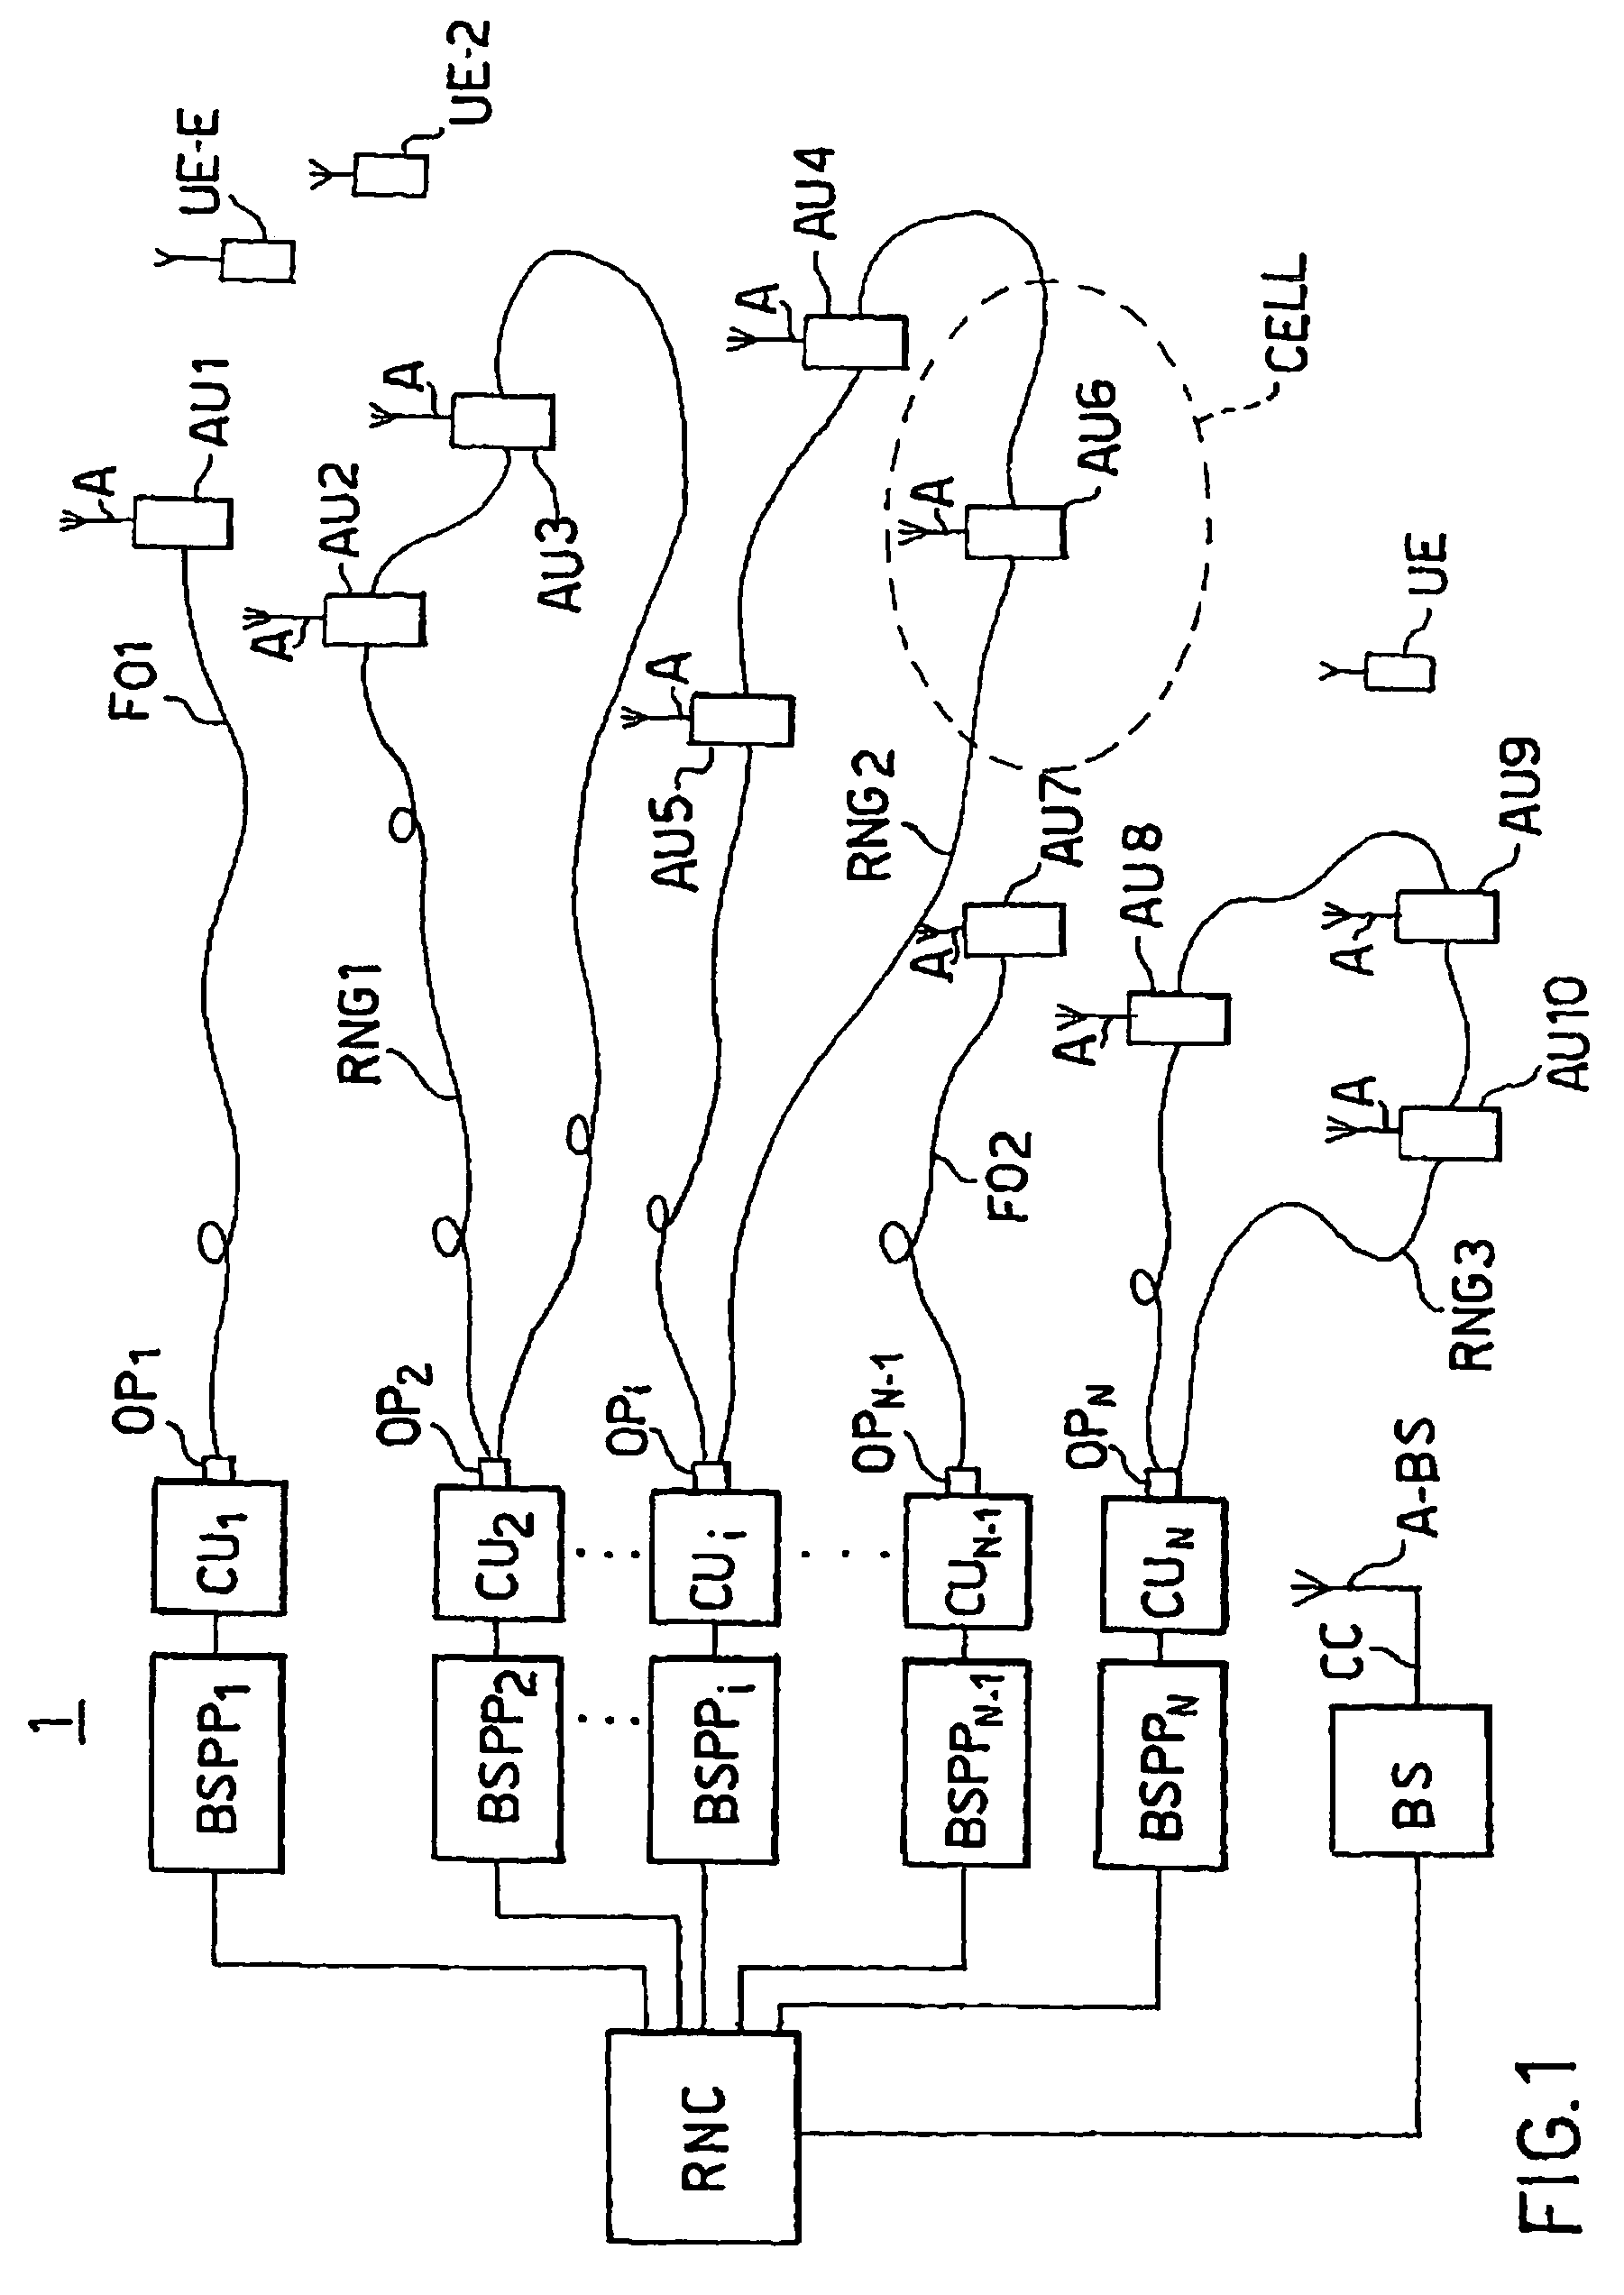 Radio base station receiver having digital filtering and reduced sampling frequency